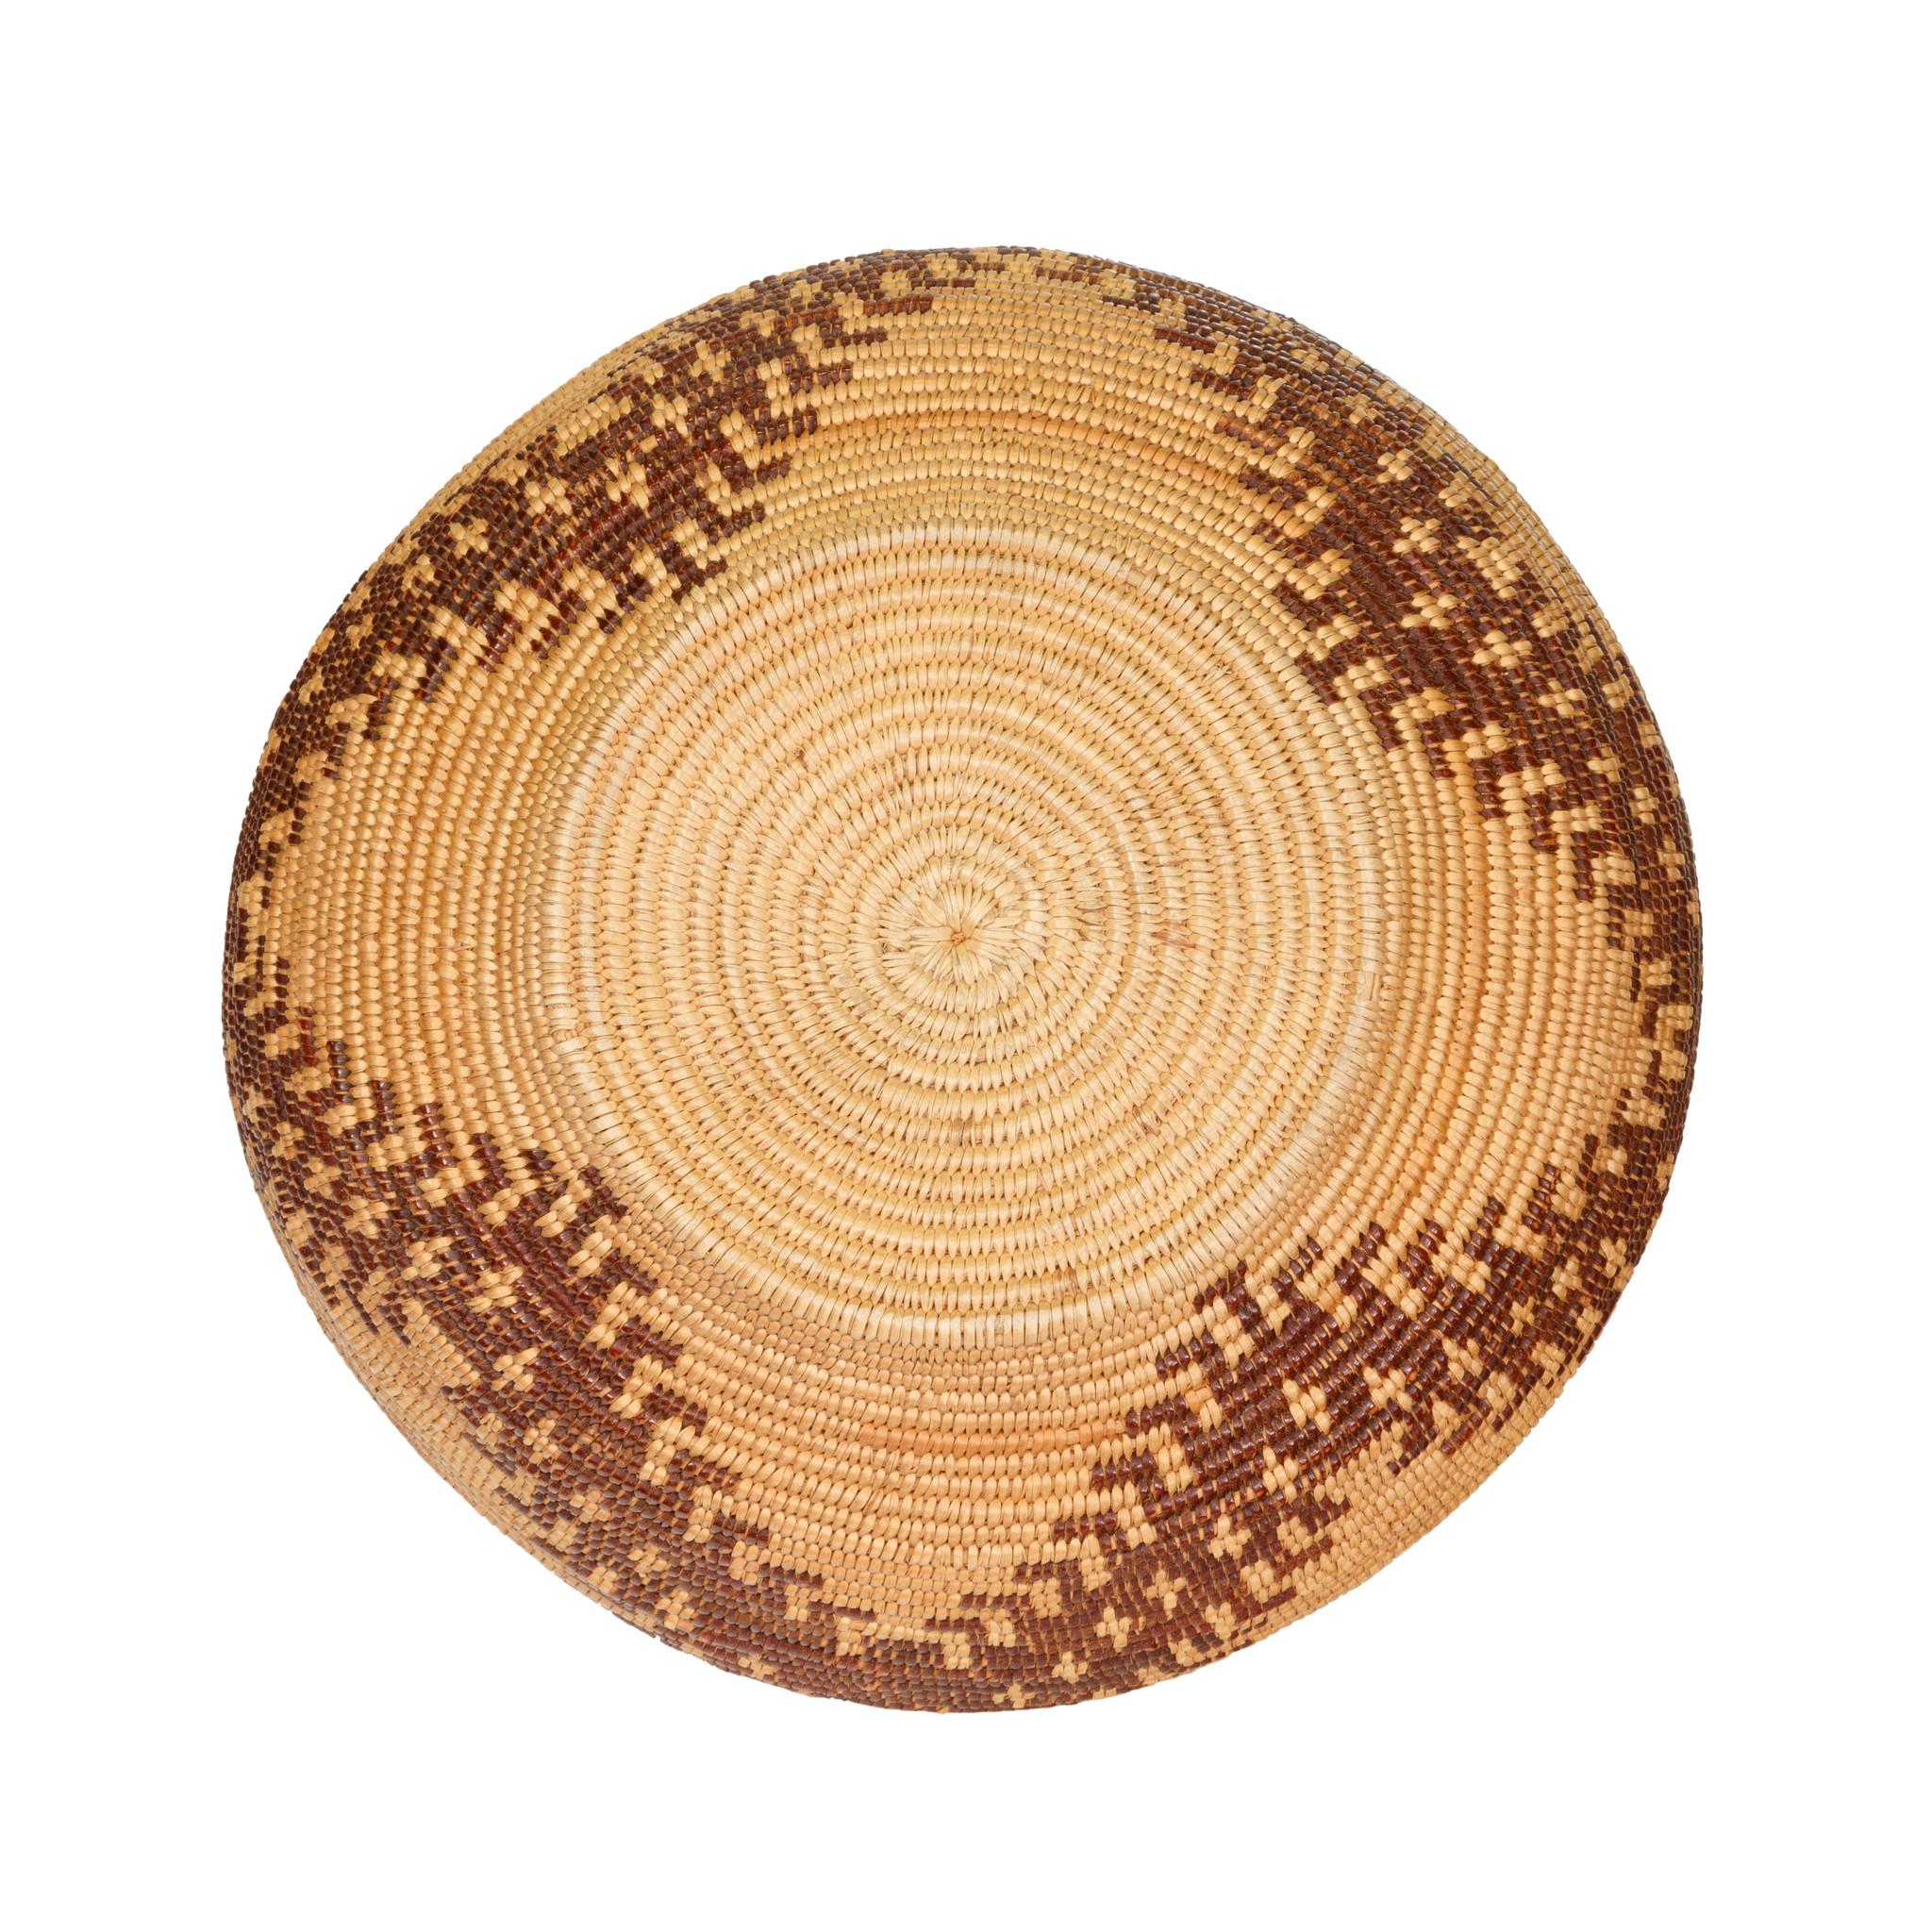 Maidu bowl with continuous quail top knot design on sides. 1/2